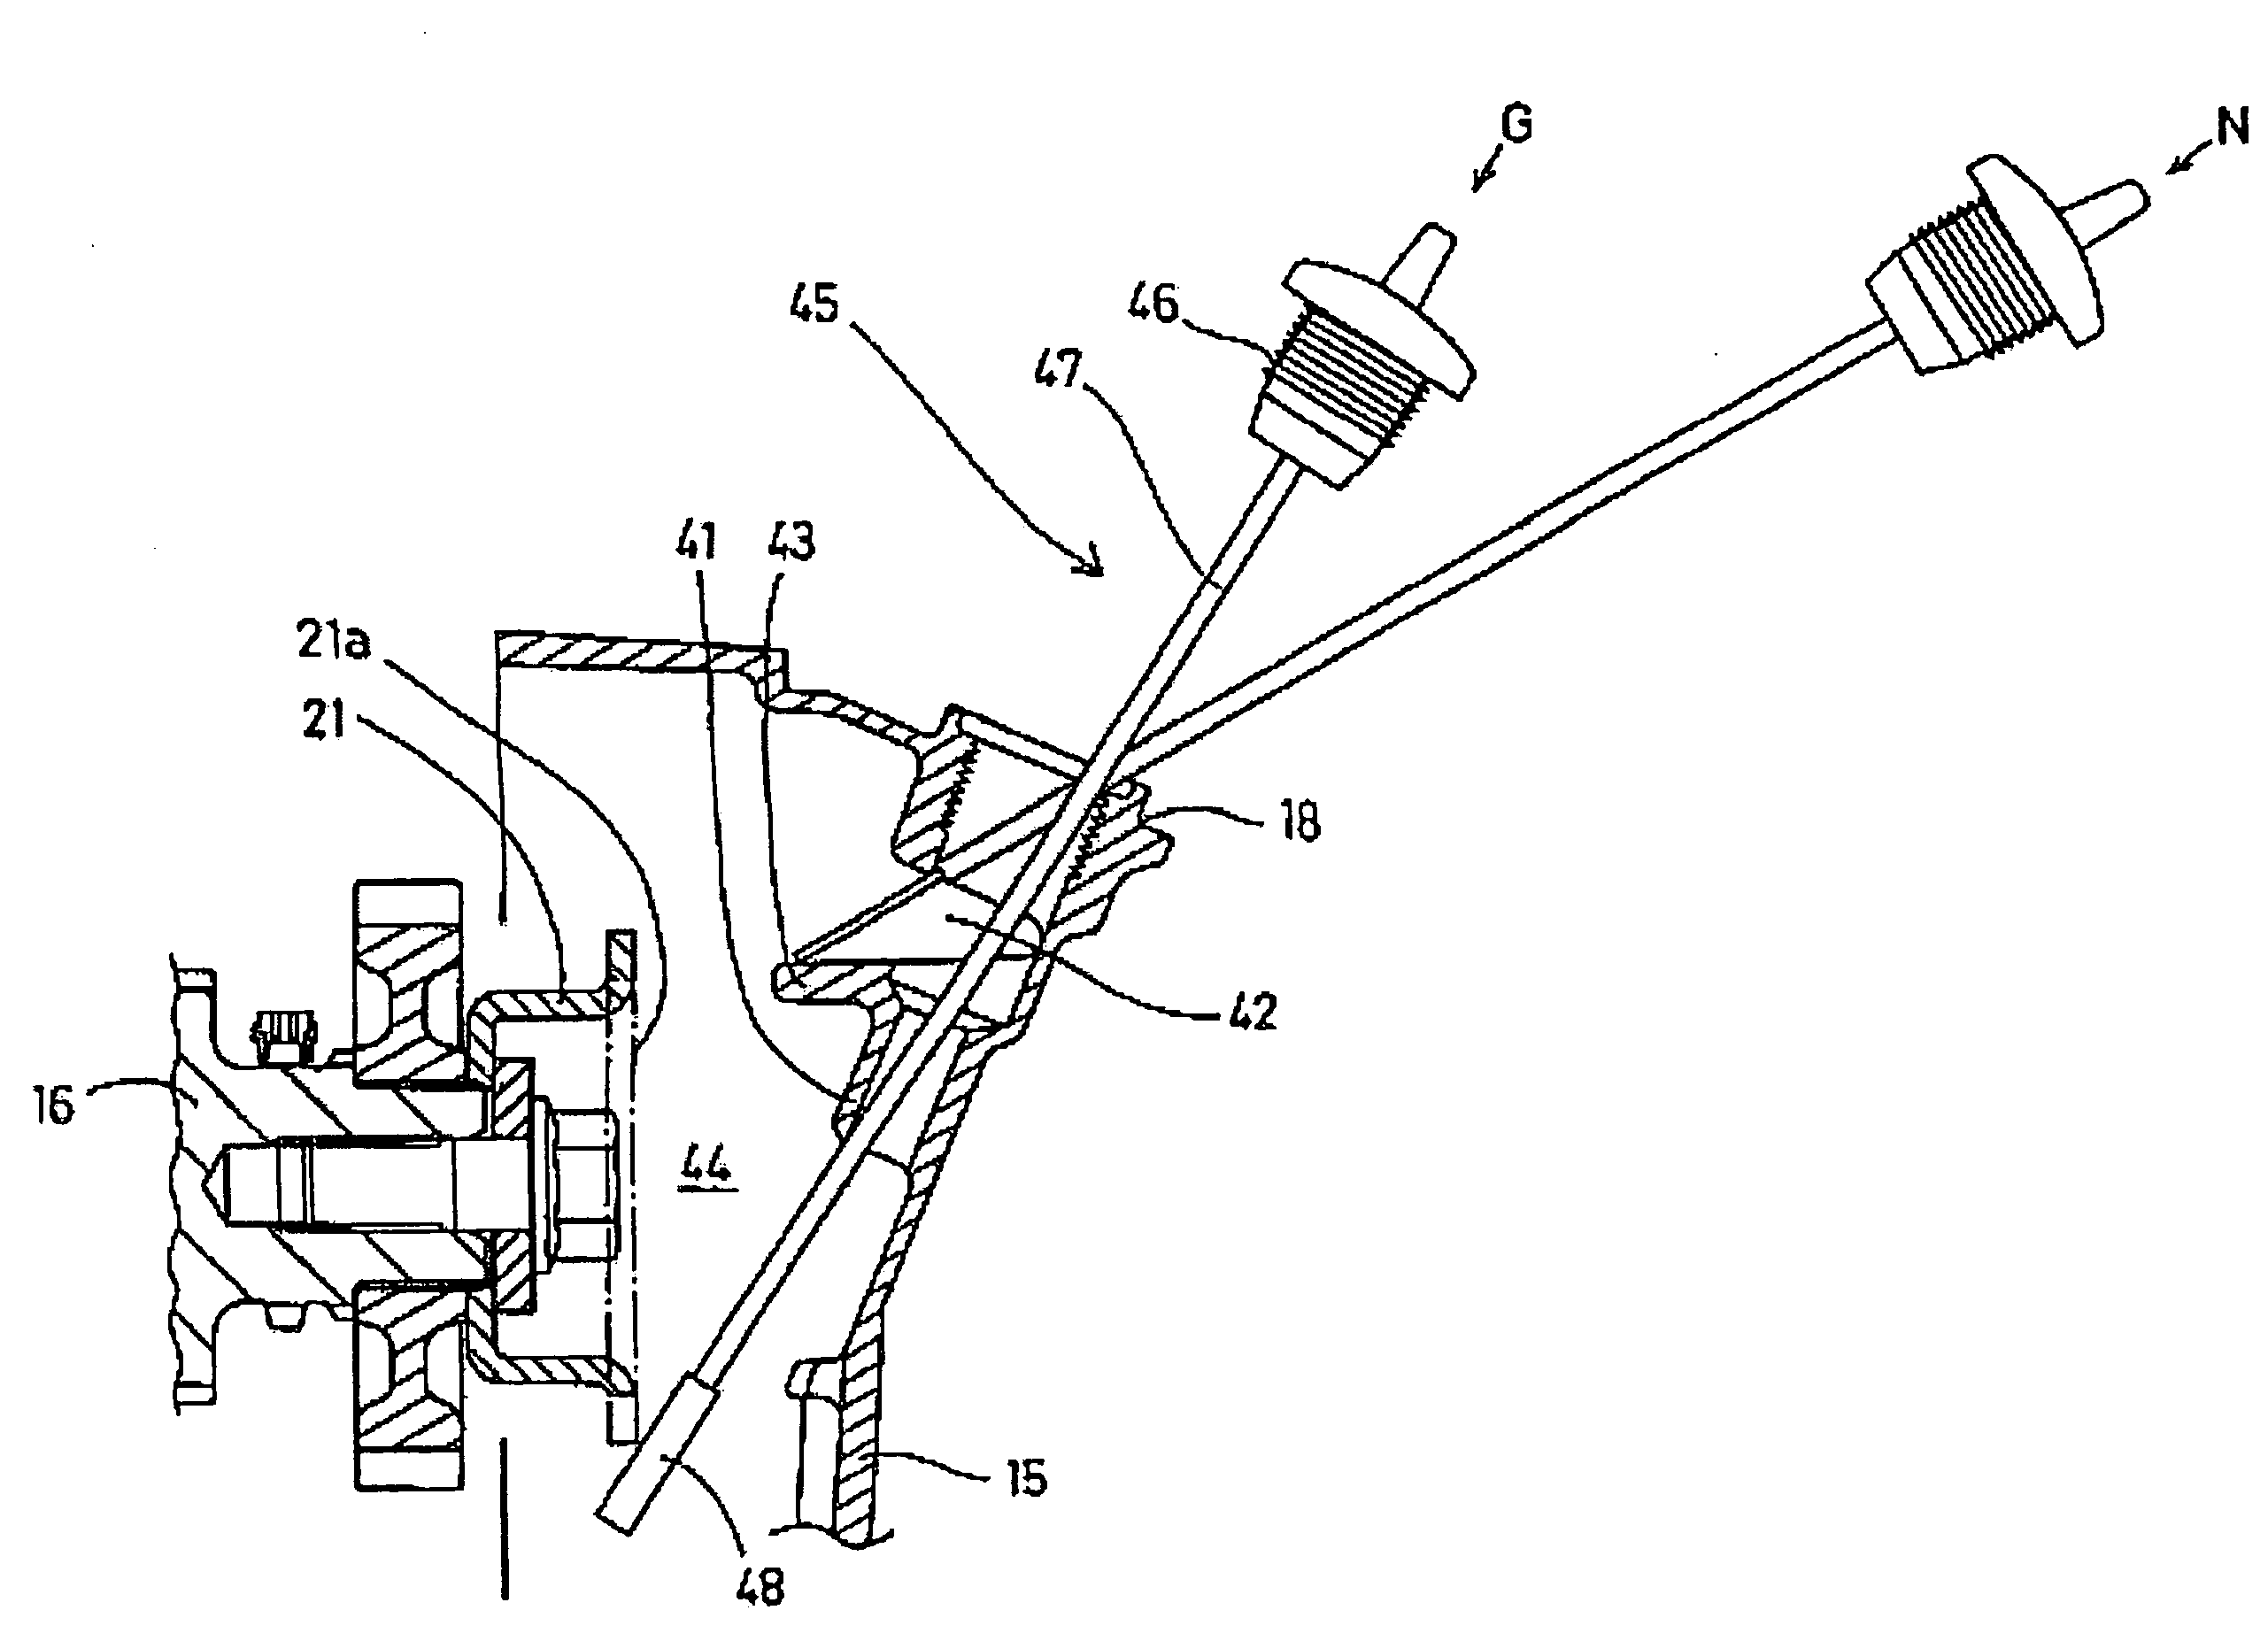 Oil filling structure of internal combustion engine